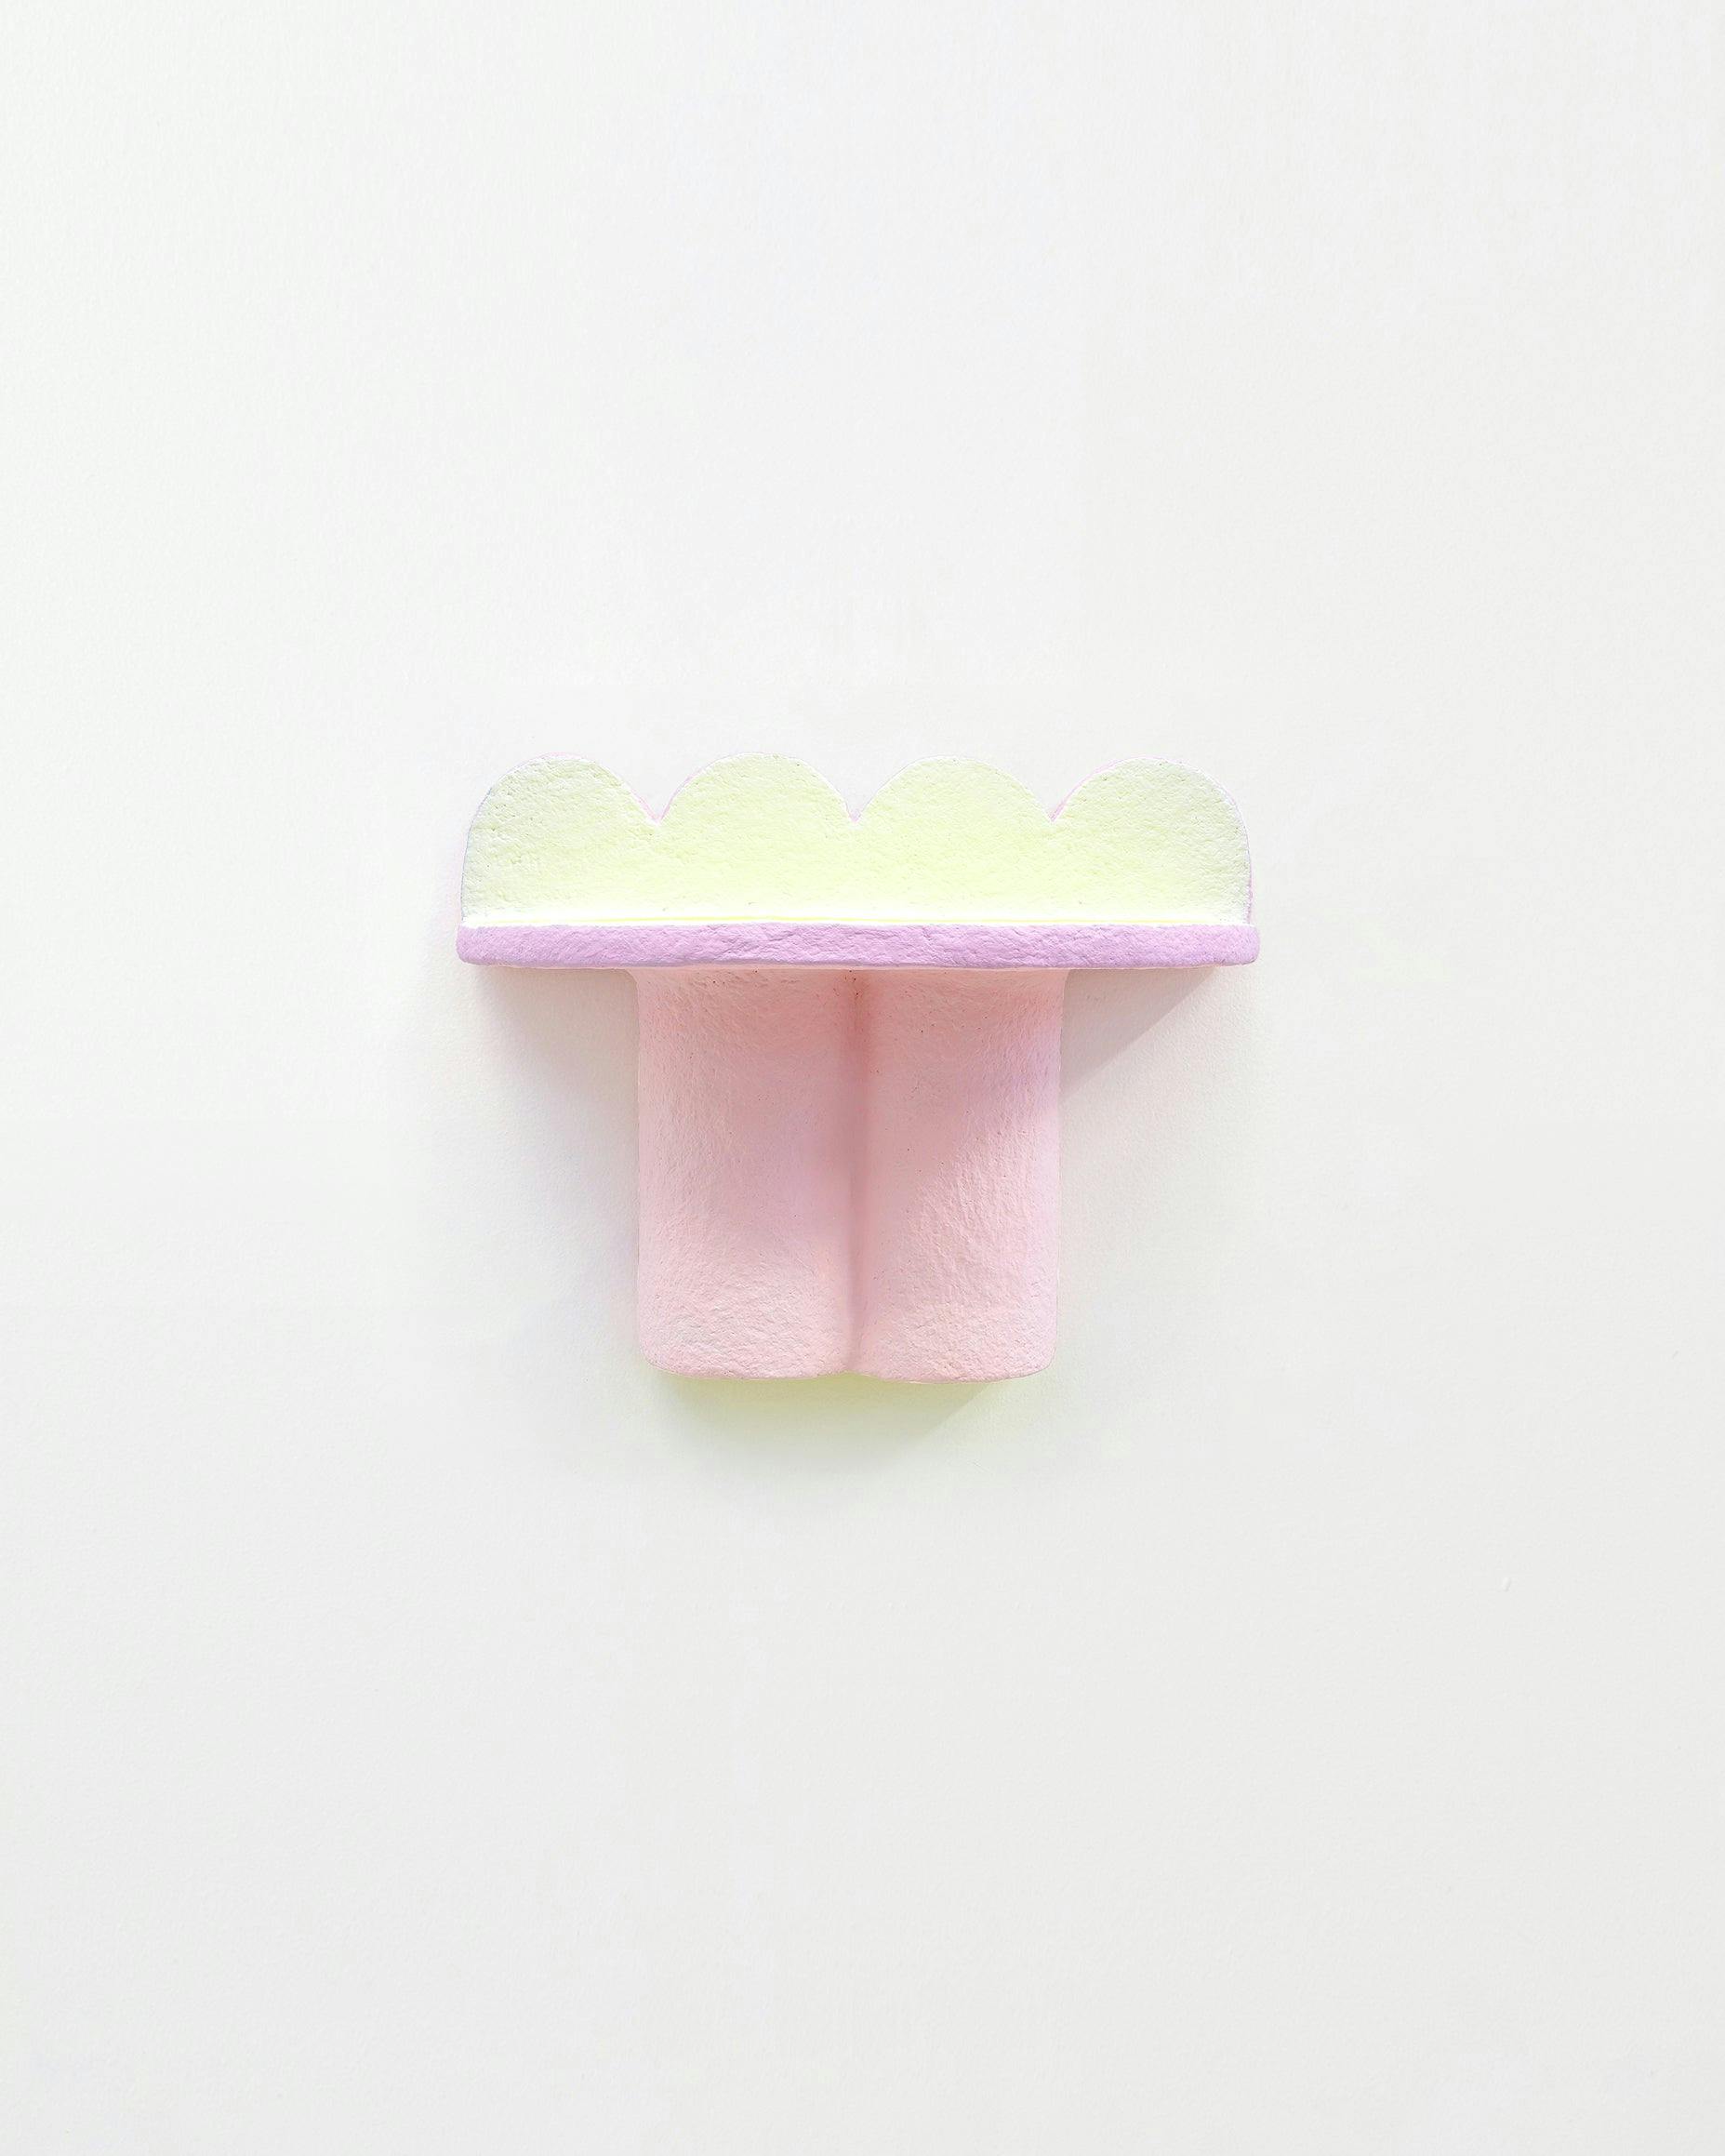 Mixed Media by Adam Frezza & Terri Chiao (CHIAOZZA) titled "Shrine to Nothingness (Neutral Grey, Pale Pink, Fluorescent Chartreuse)".